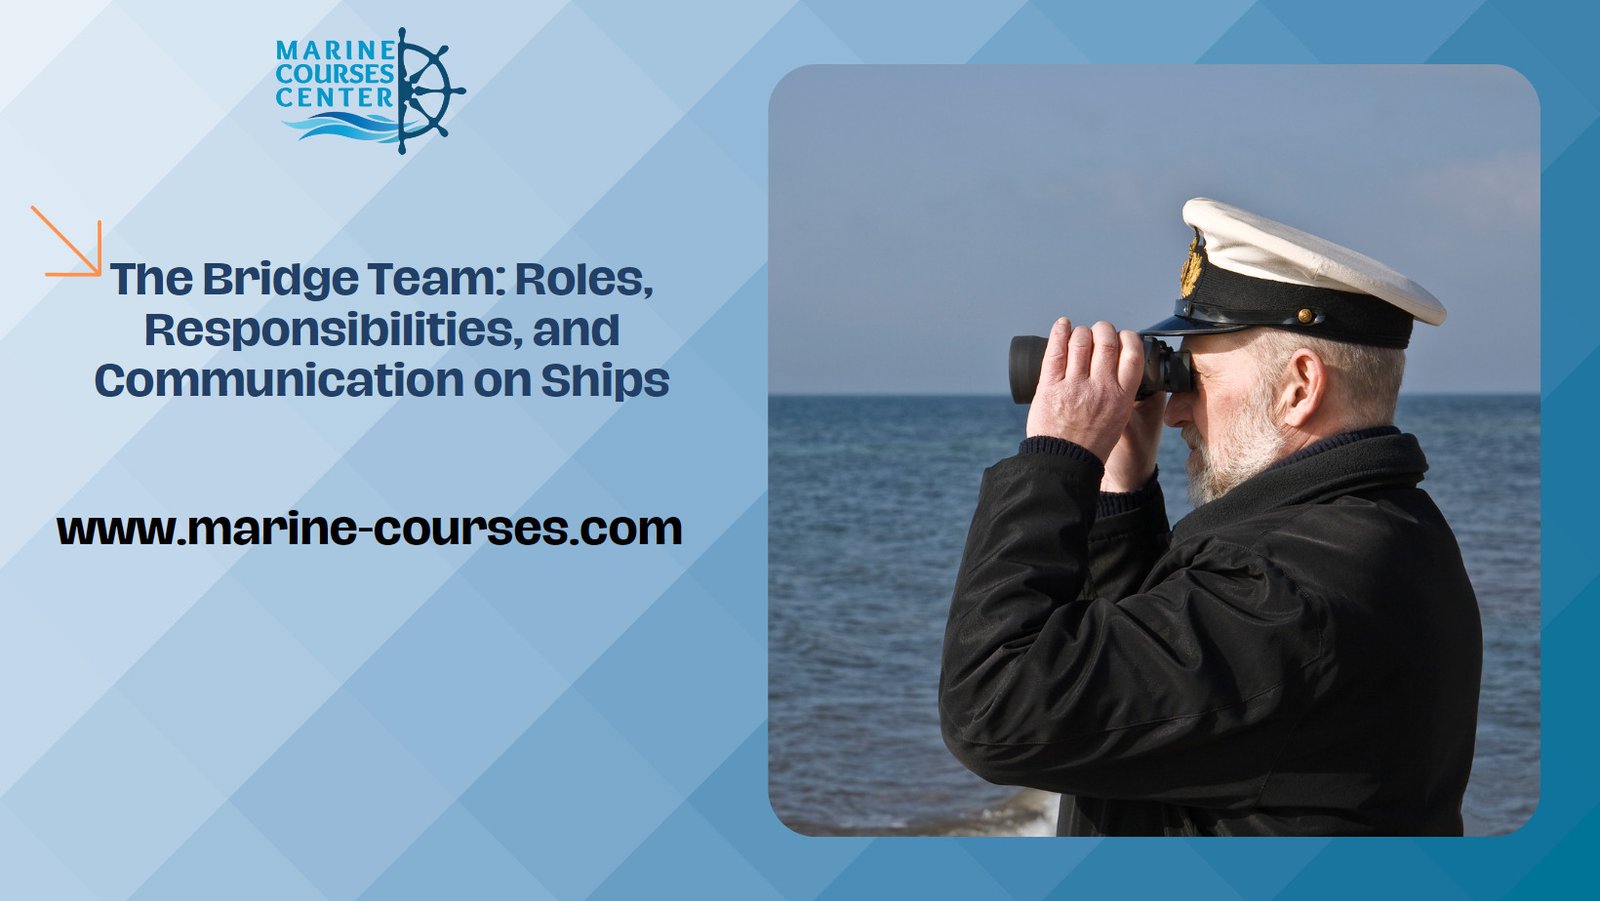 The Bridge Team: Roles, Responsibilities, and Communication on Ships